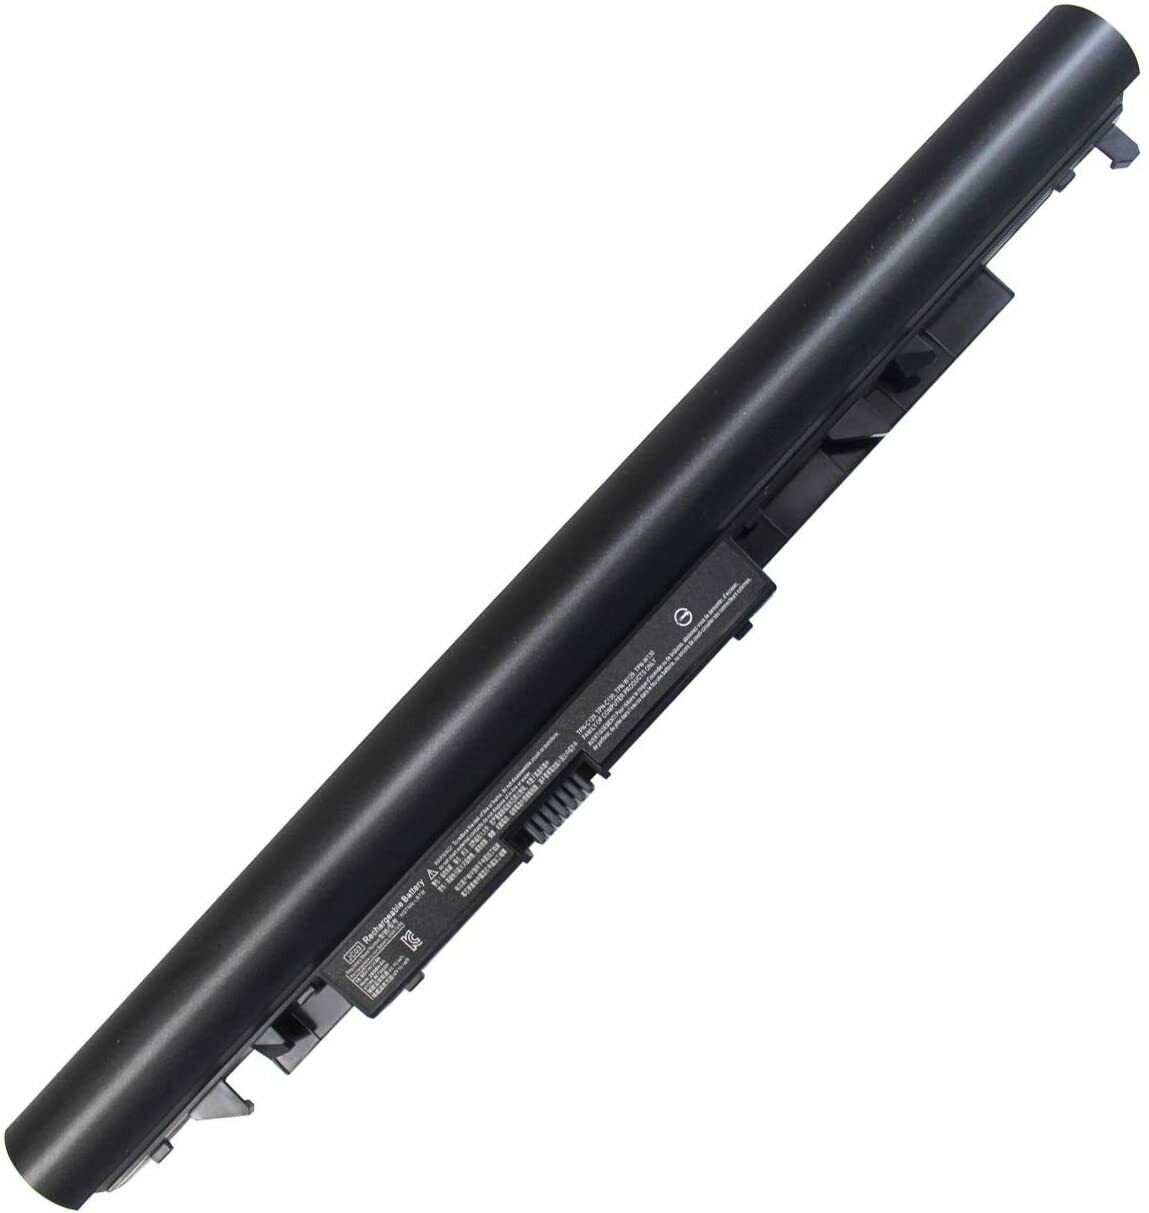 New Battery For HP Notebook 15-BS 15-BW 17-BS 15Q-BU 15G-BR 17-AK 15Q-BY Series 